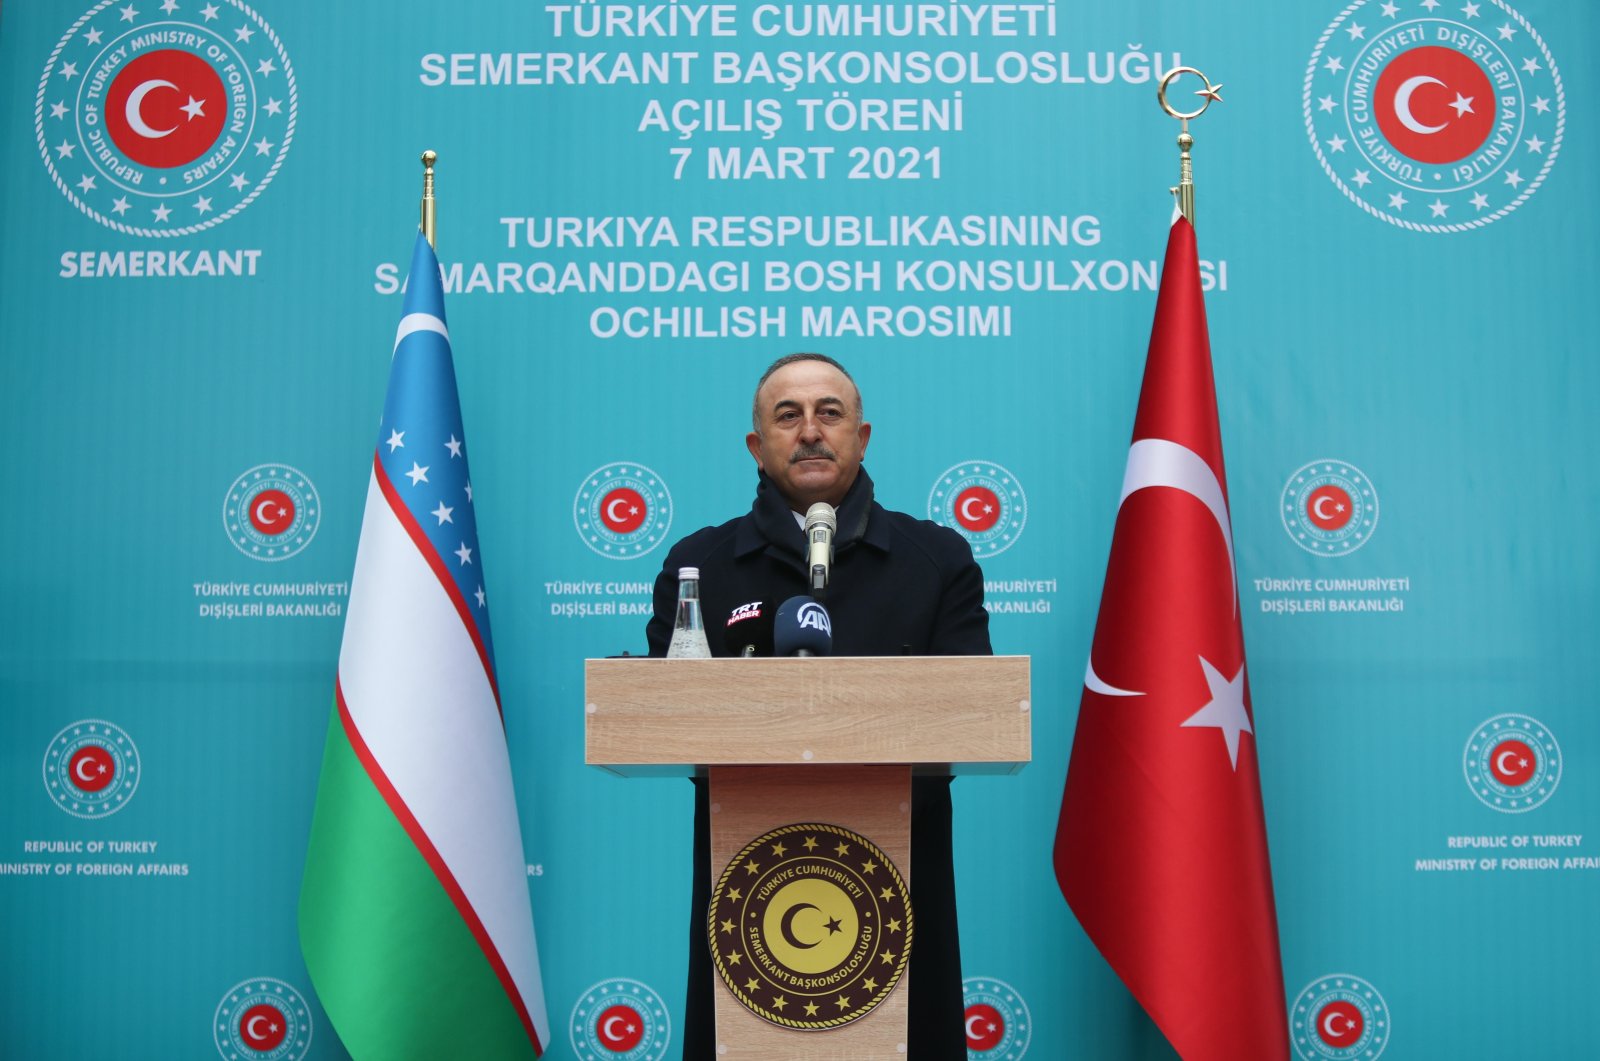 Foreign Minister Mevlüt Çavuşoğlu speaks during the opening ceremony of Turkey's consulate general in Uzbekistan's Samarkand city, March 7, 2021. (AA Photo)